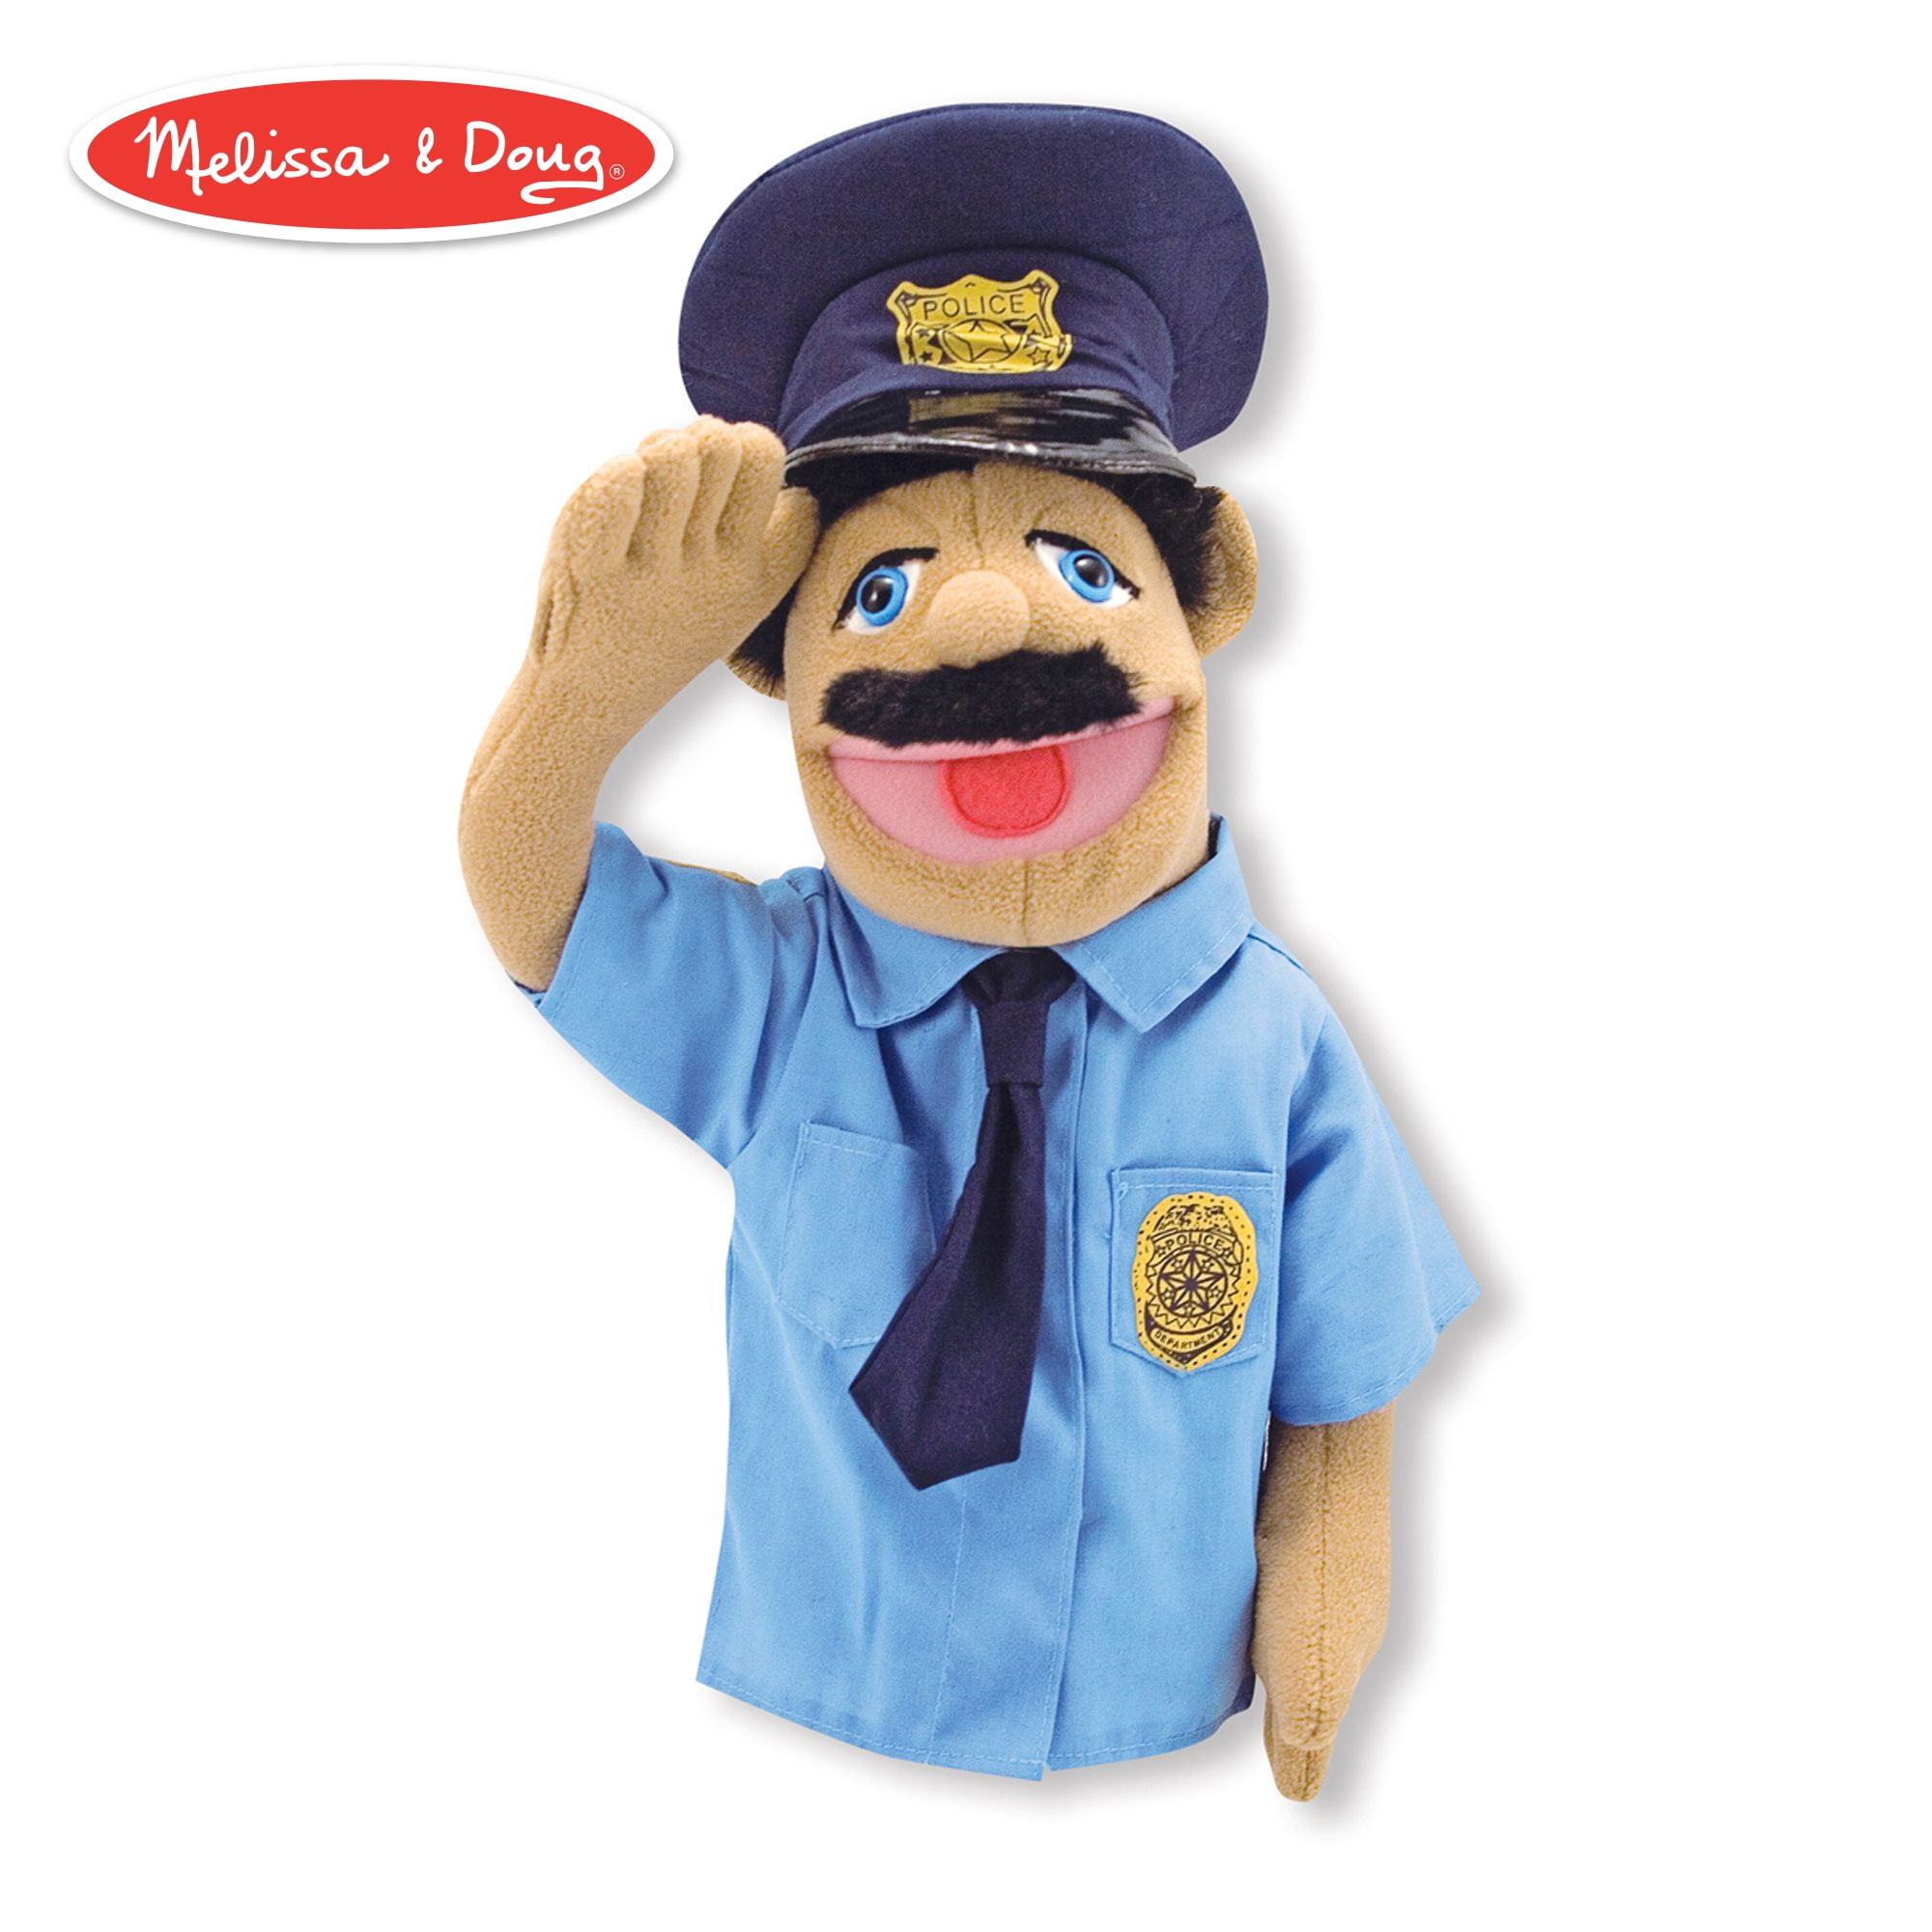 Melissa & Doug Police Officer Puppet With Detachable Wooden Rod for Animated 